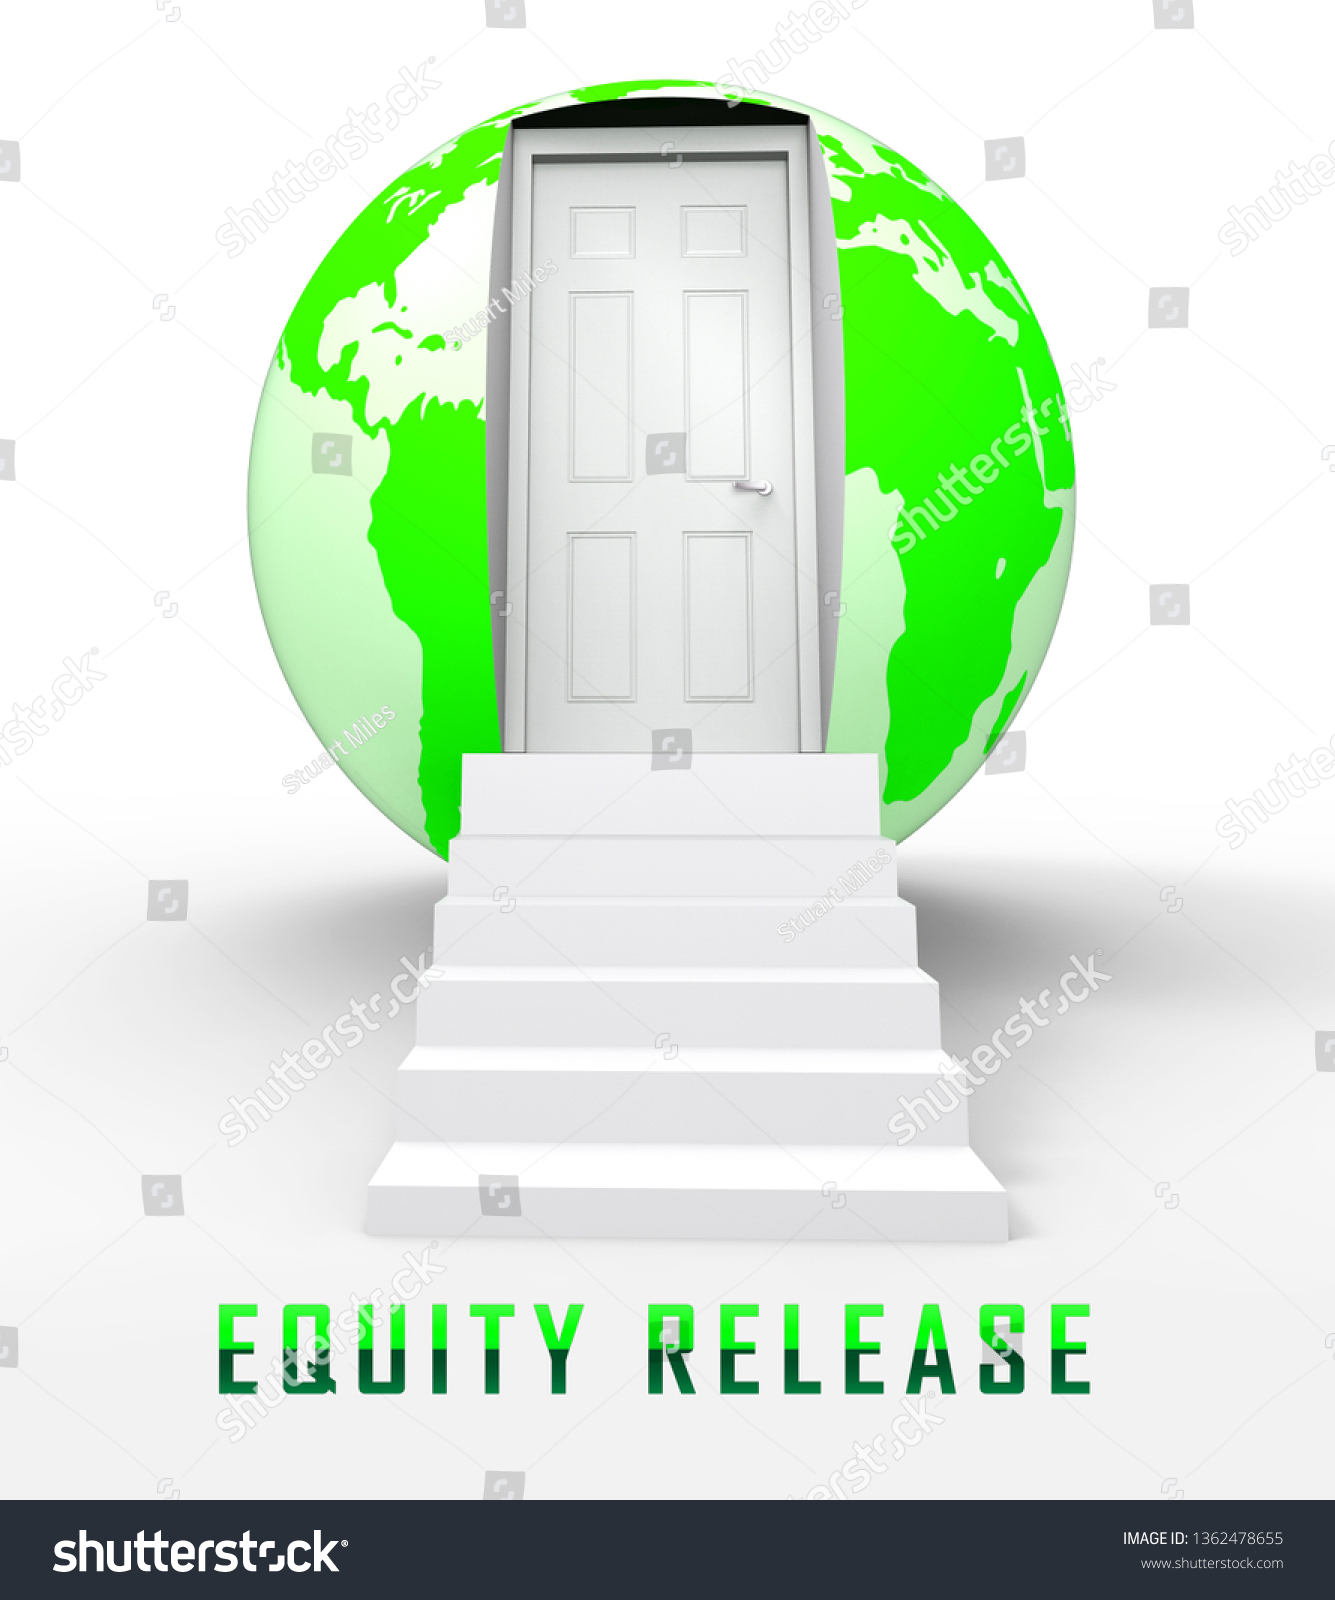 Equity Release Globe Means Line Credit Stock Illustration 1362478655 |  Shutterstock